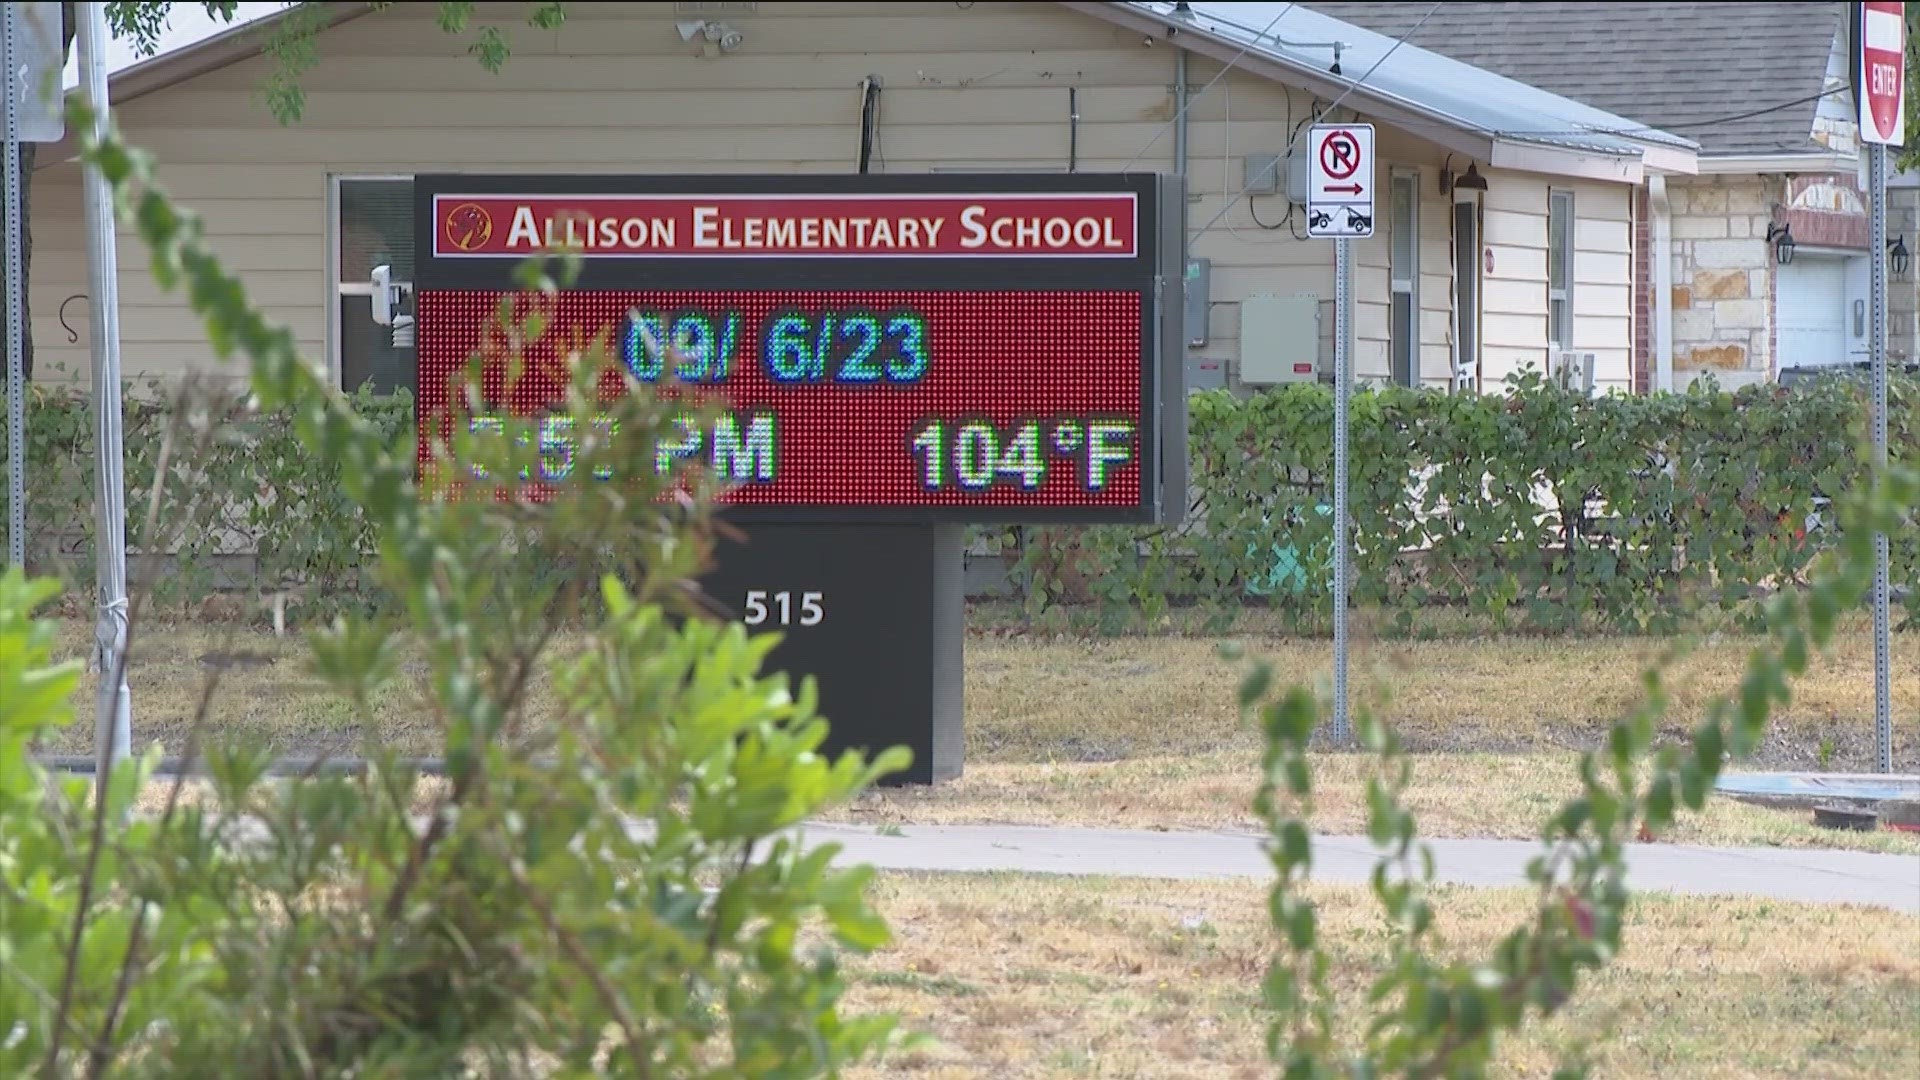 This summer's extreme heat has been brutal. But some students are facing it in a classroom without air conditioning.